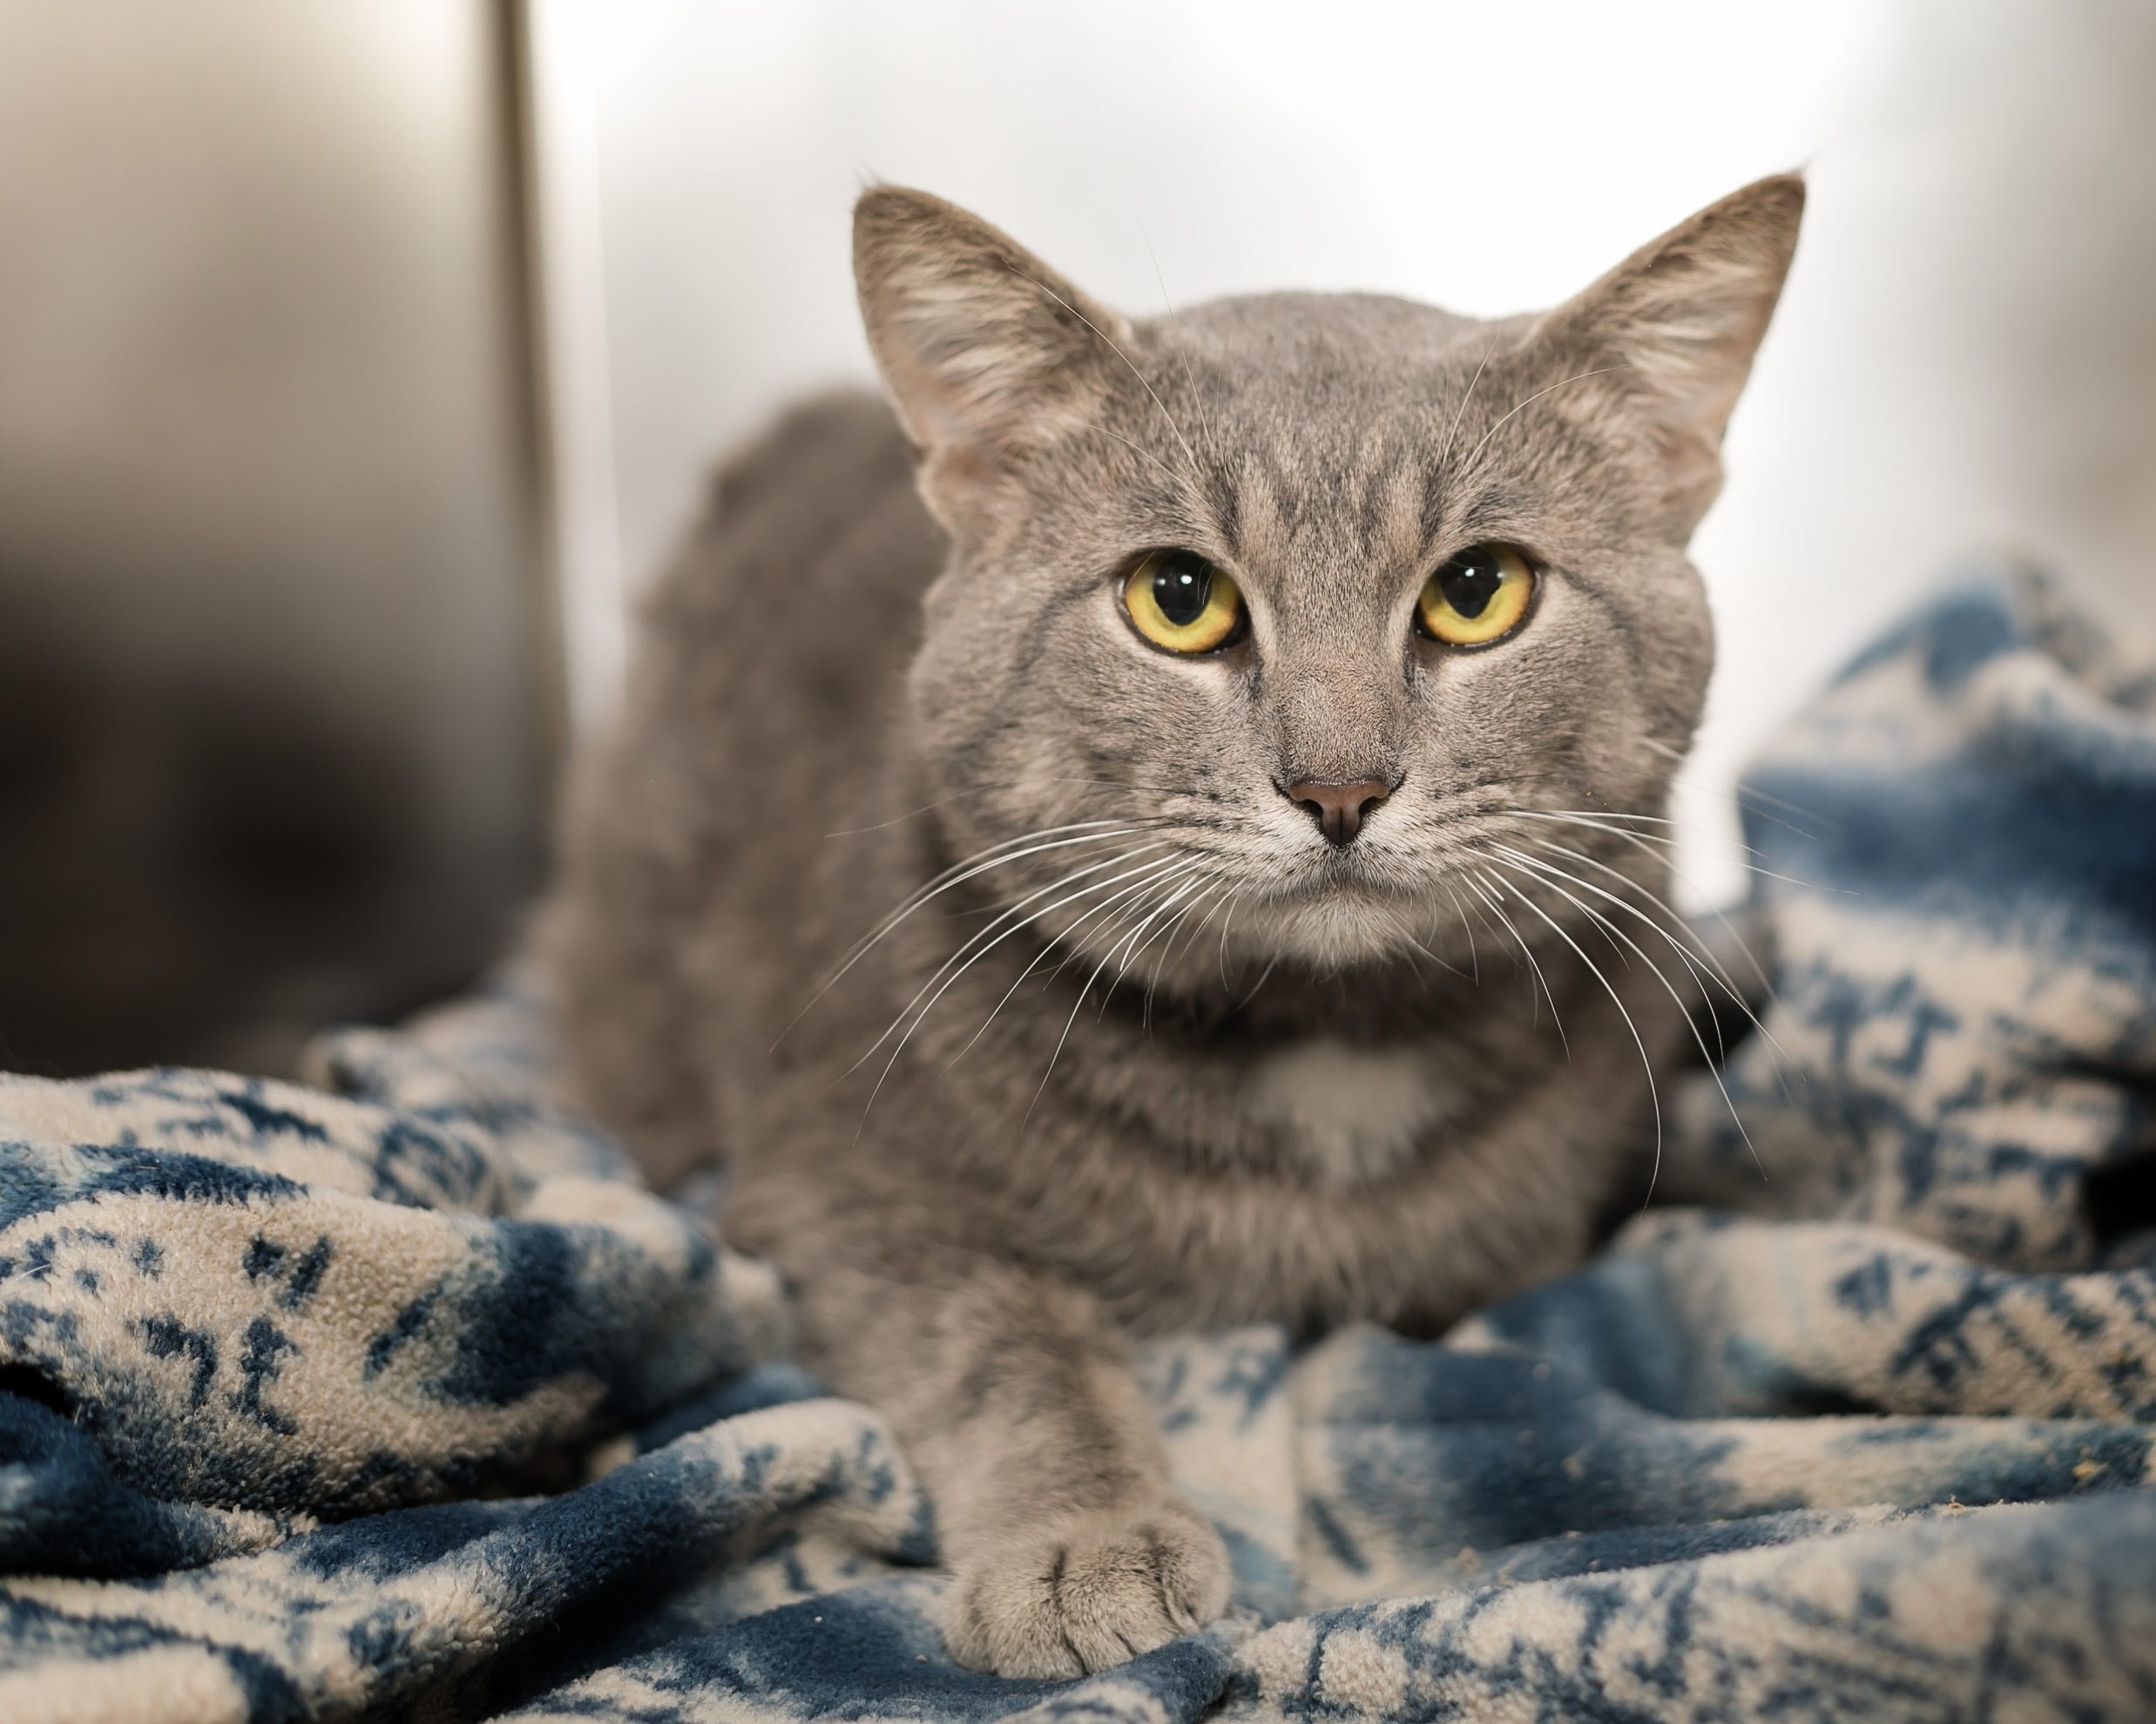 Scar (ID #A099281) is a 3-year-old gray and white tabby domestic short-hair cat who came to the shelter as a stray on Jan. 11. [Diana Bunch | Pet Pawtography]